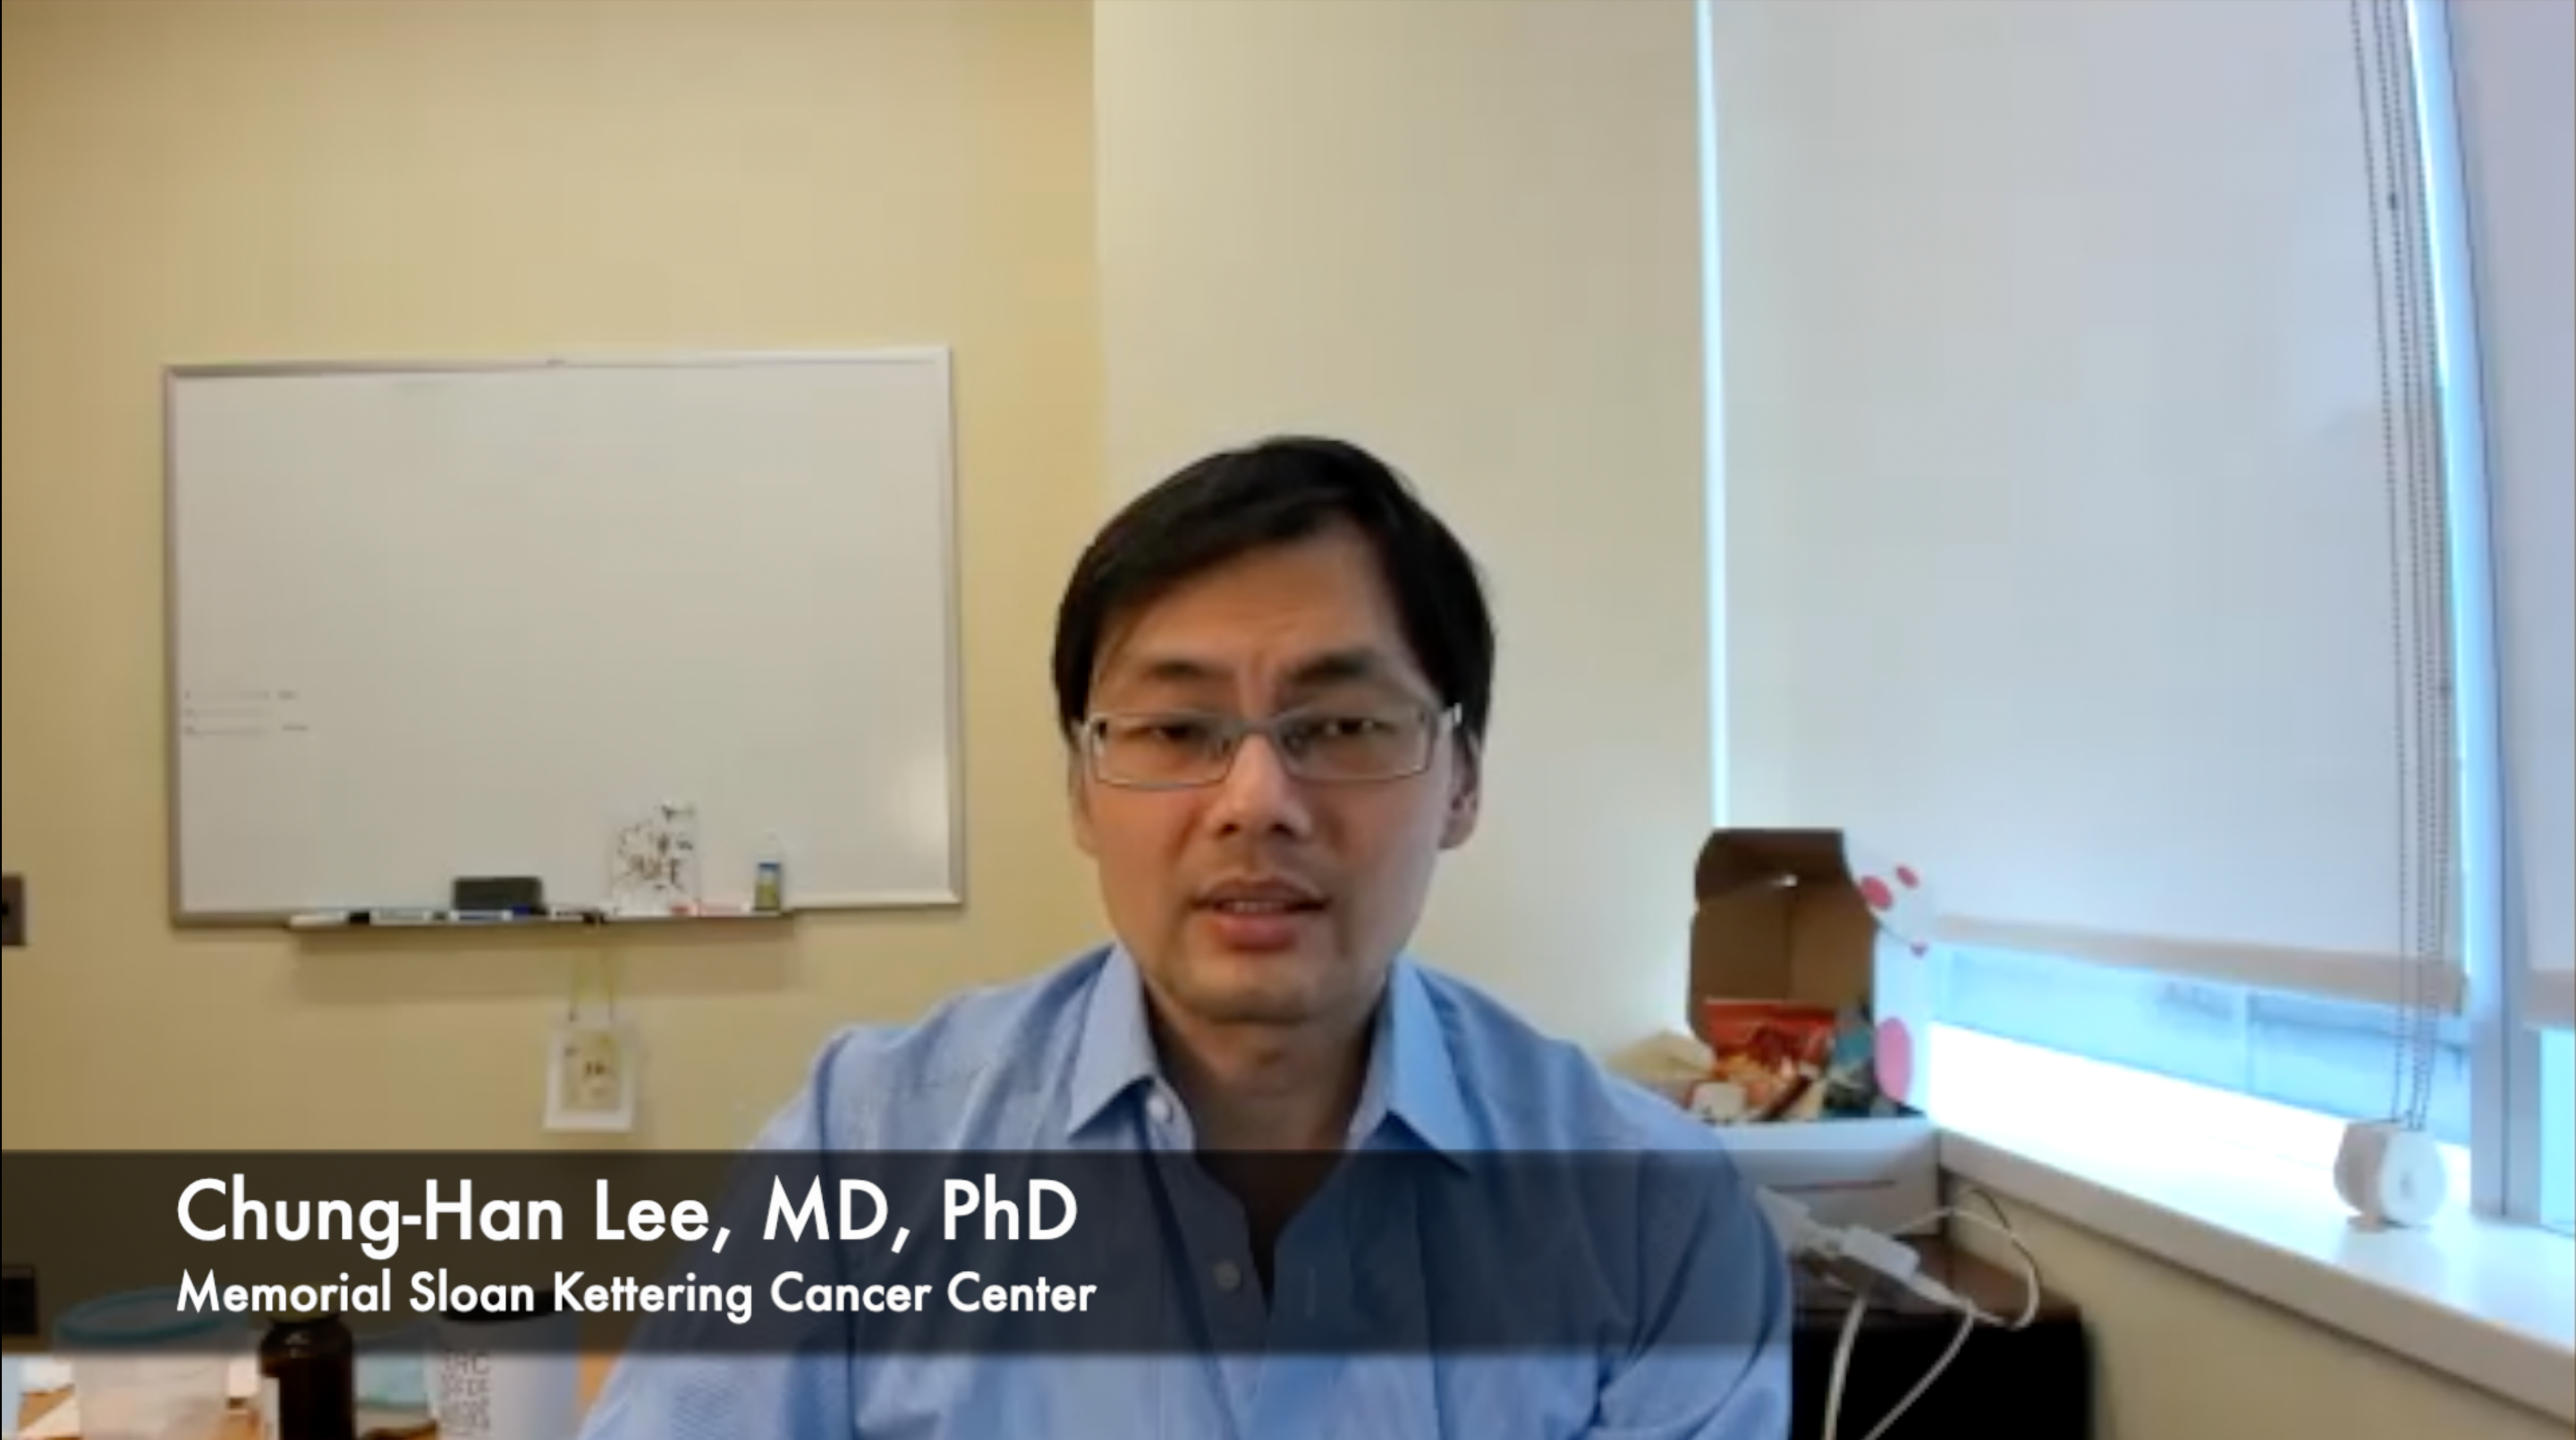 Chung-Han Lee, MD, PhD, Discusses Biomarkers for Response in RCC With Pembrolizumab Plus Lenvatinib 